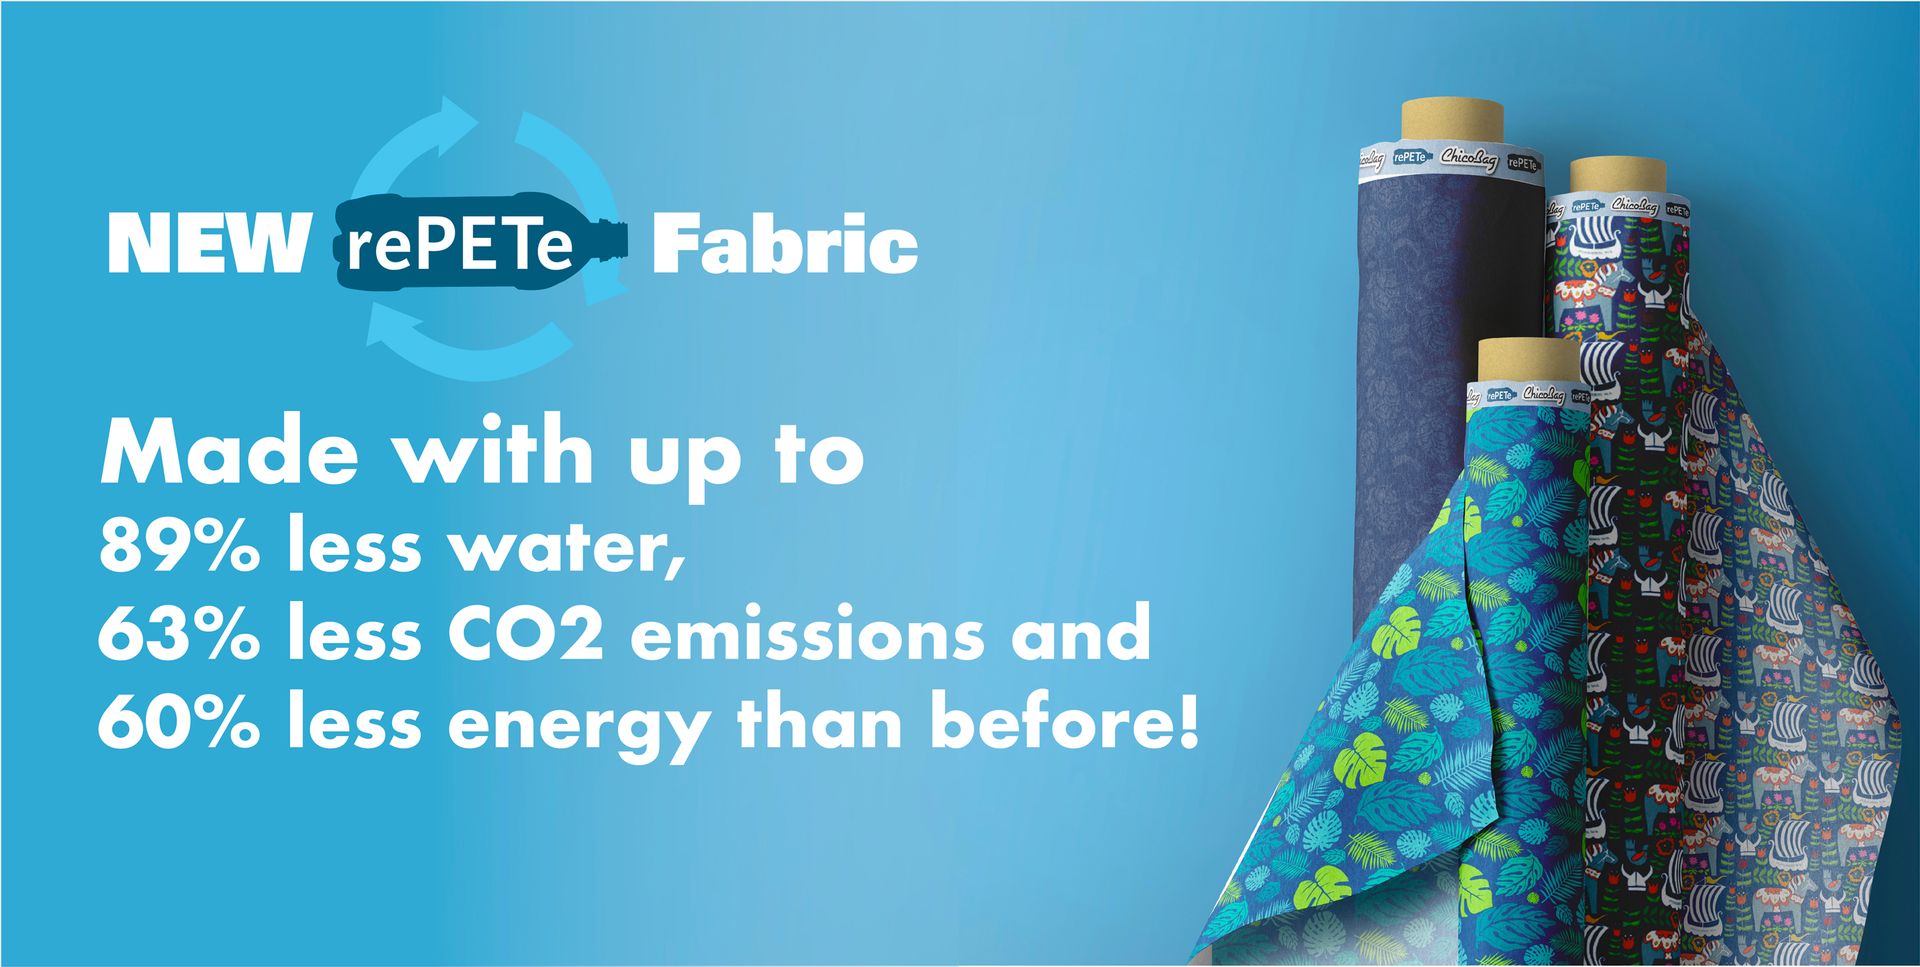 Announcing: NEW fabric made with approximately 89% less water, 63% less CO2 emissions and 60% less energy than before!